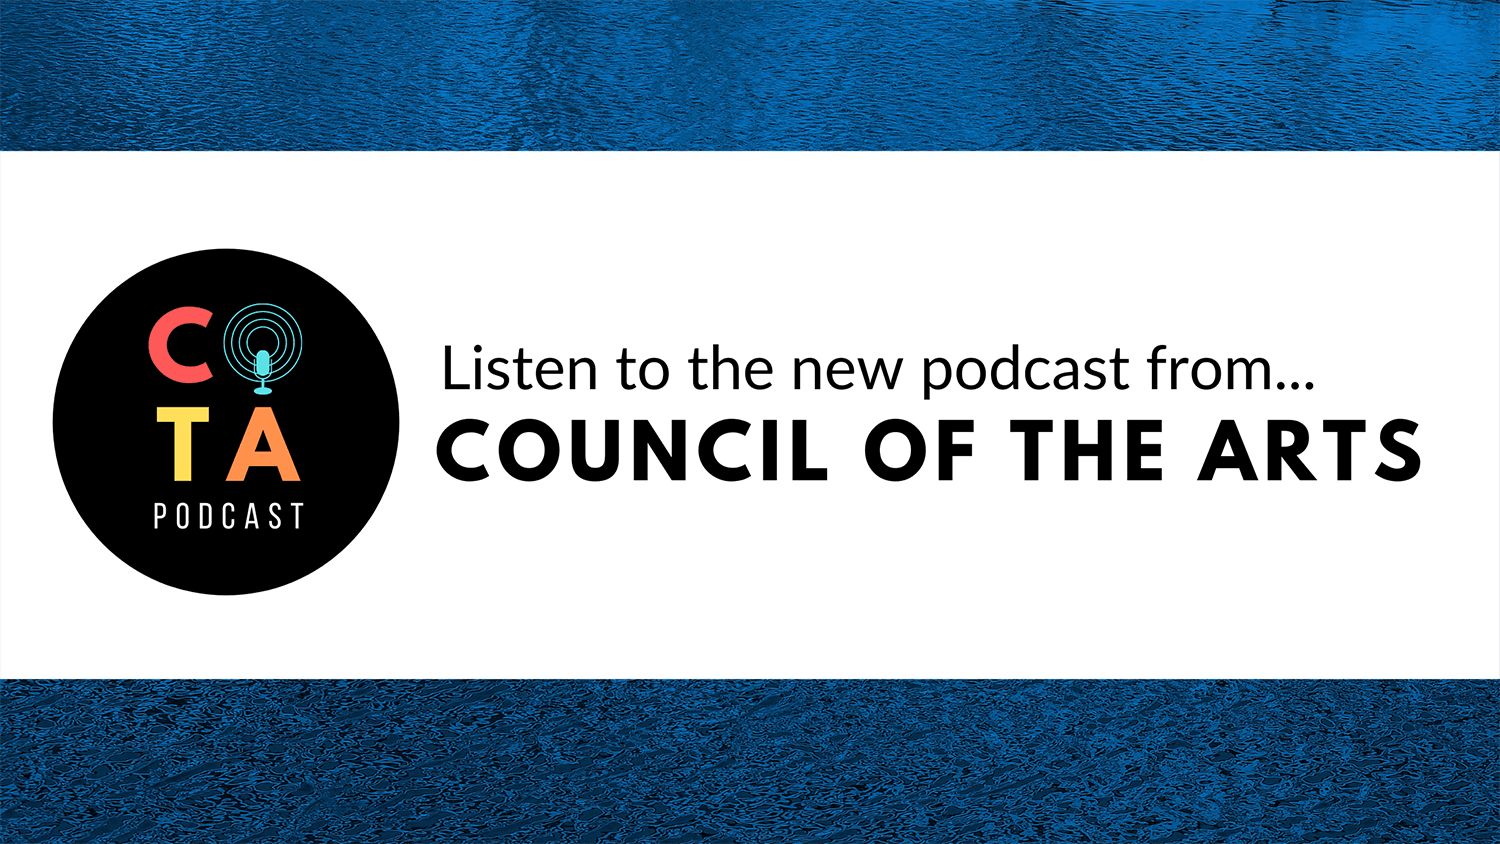 Council of the Arts Podcast Debuts